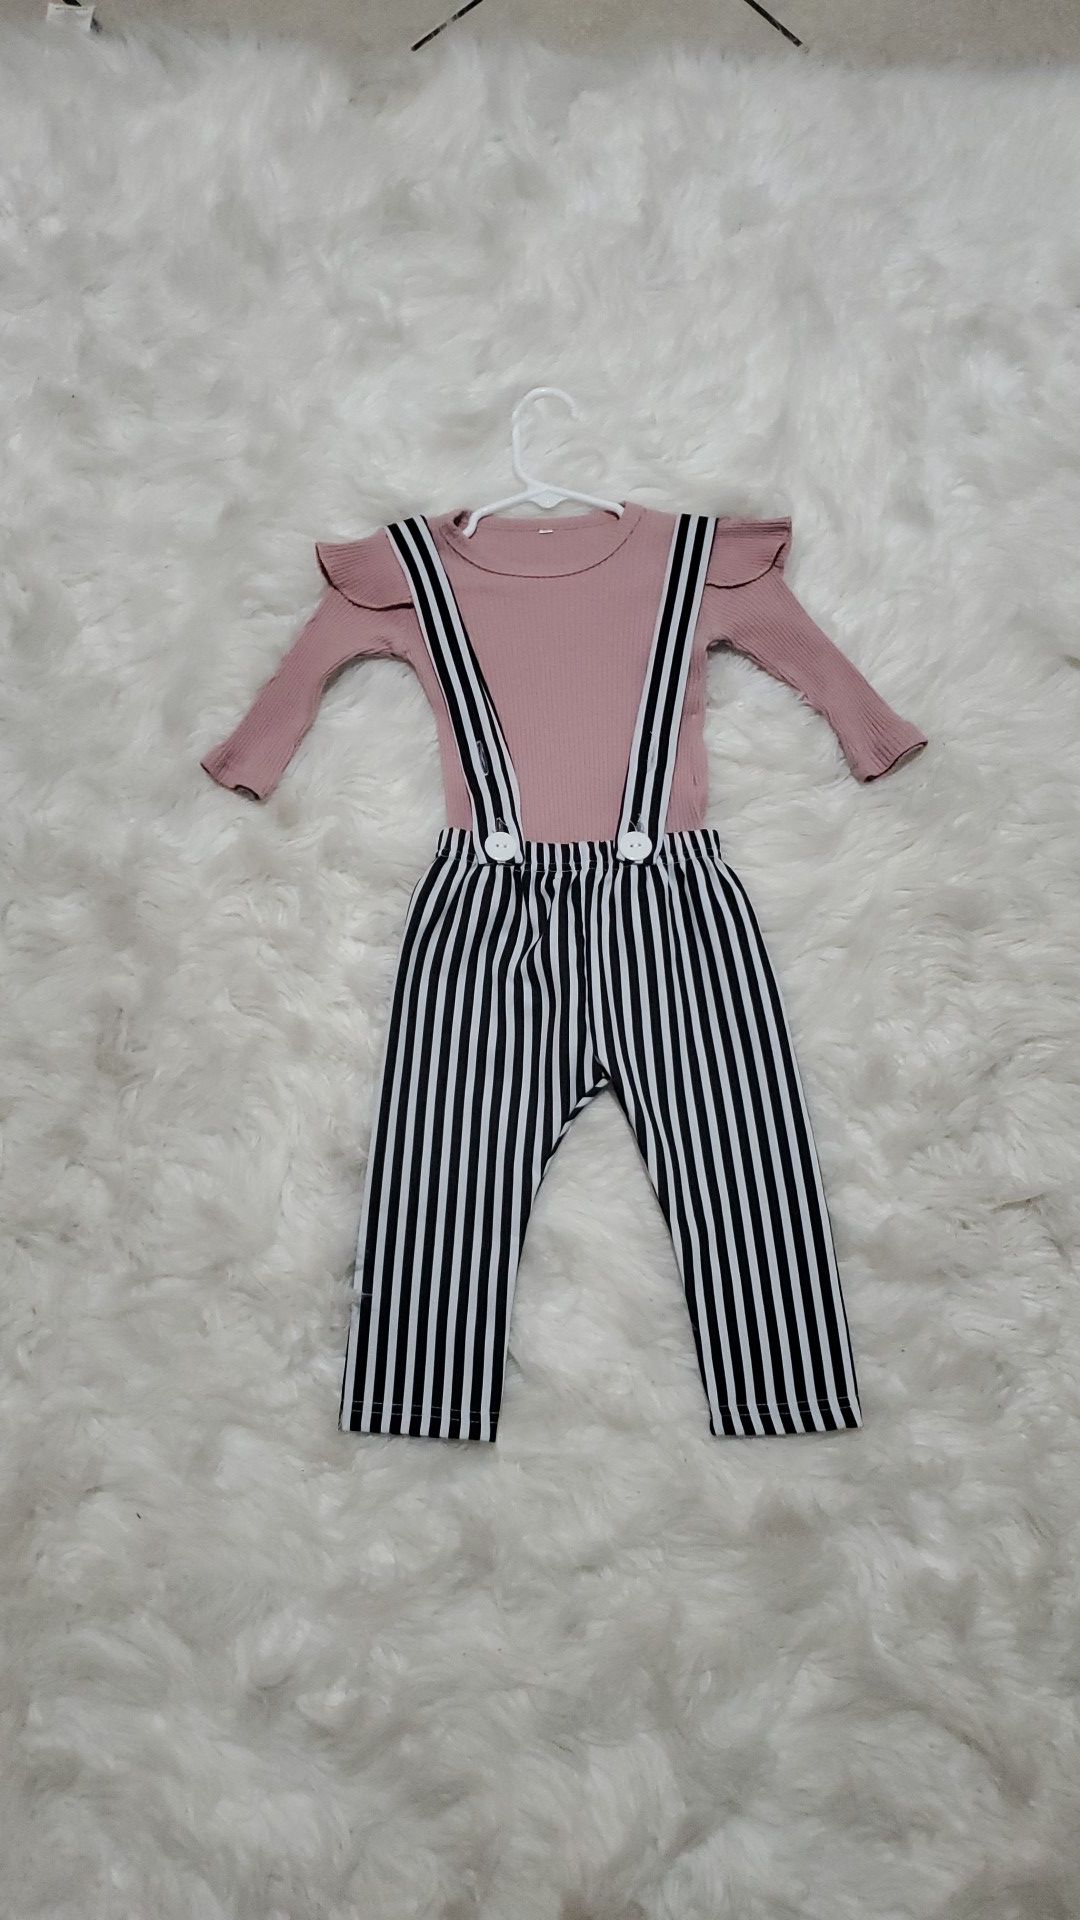 Baby girl outfit size 18 months